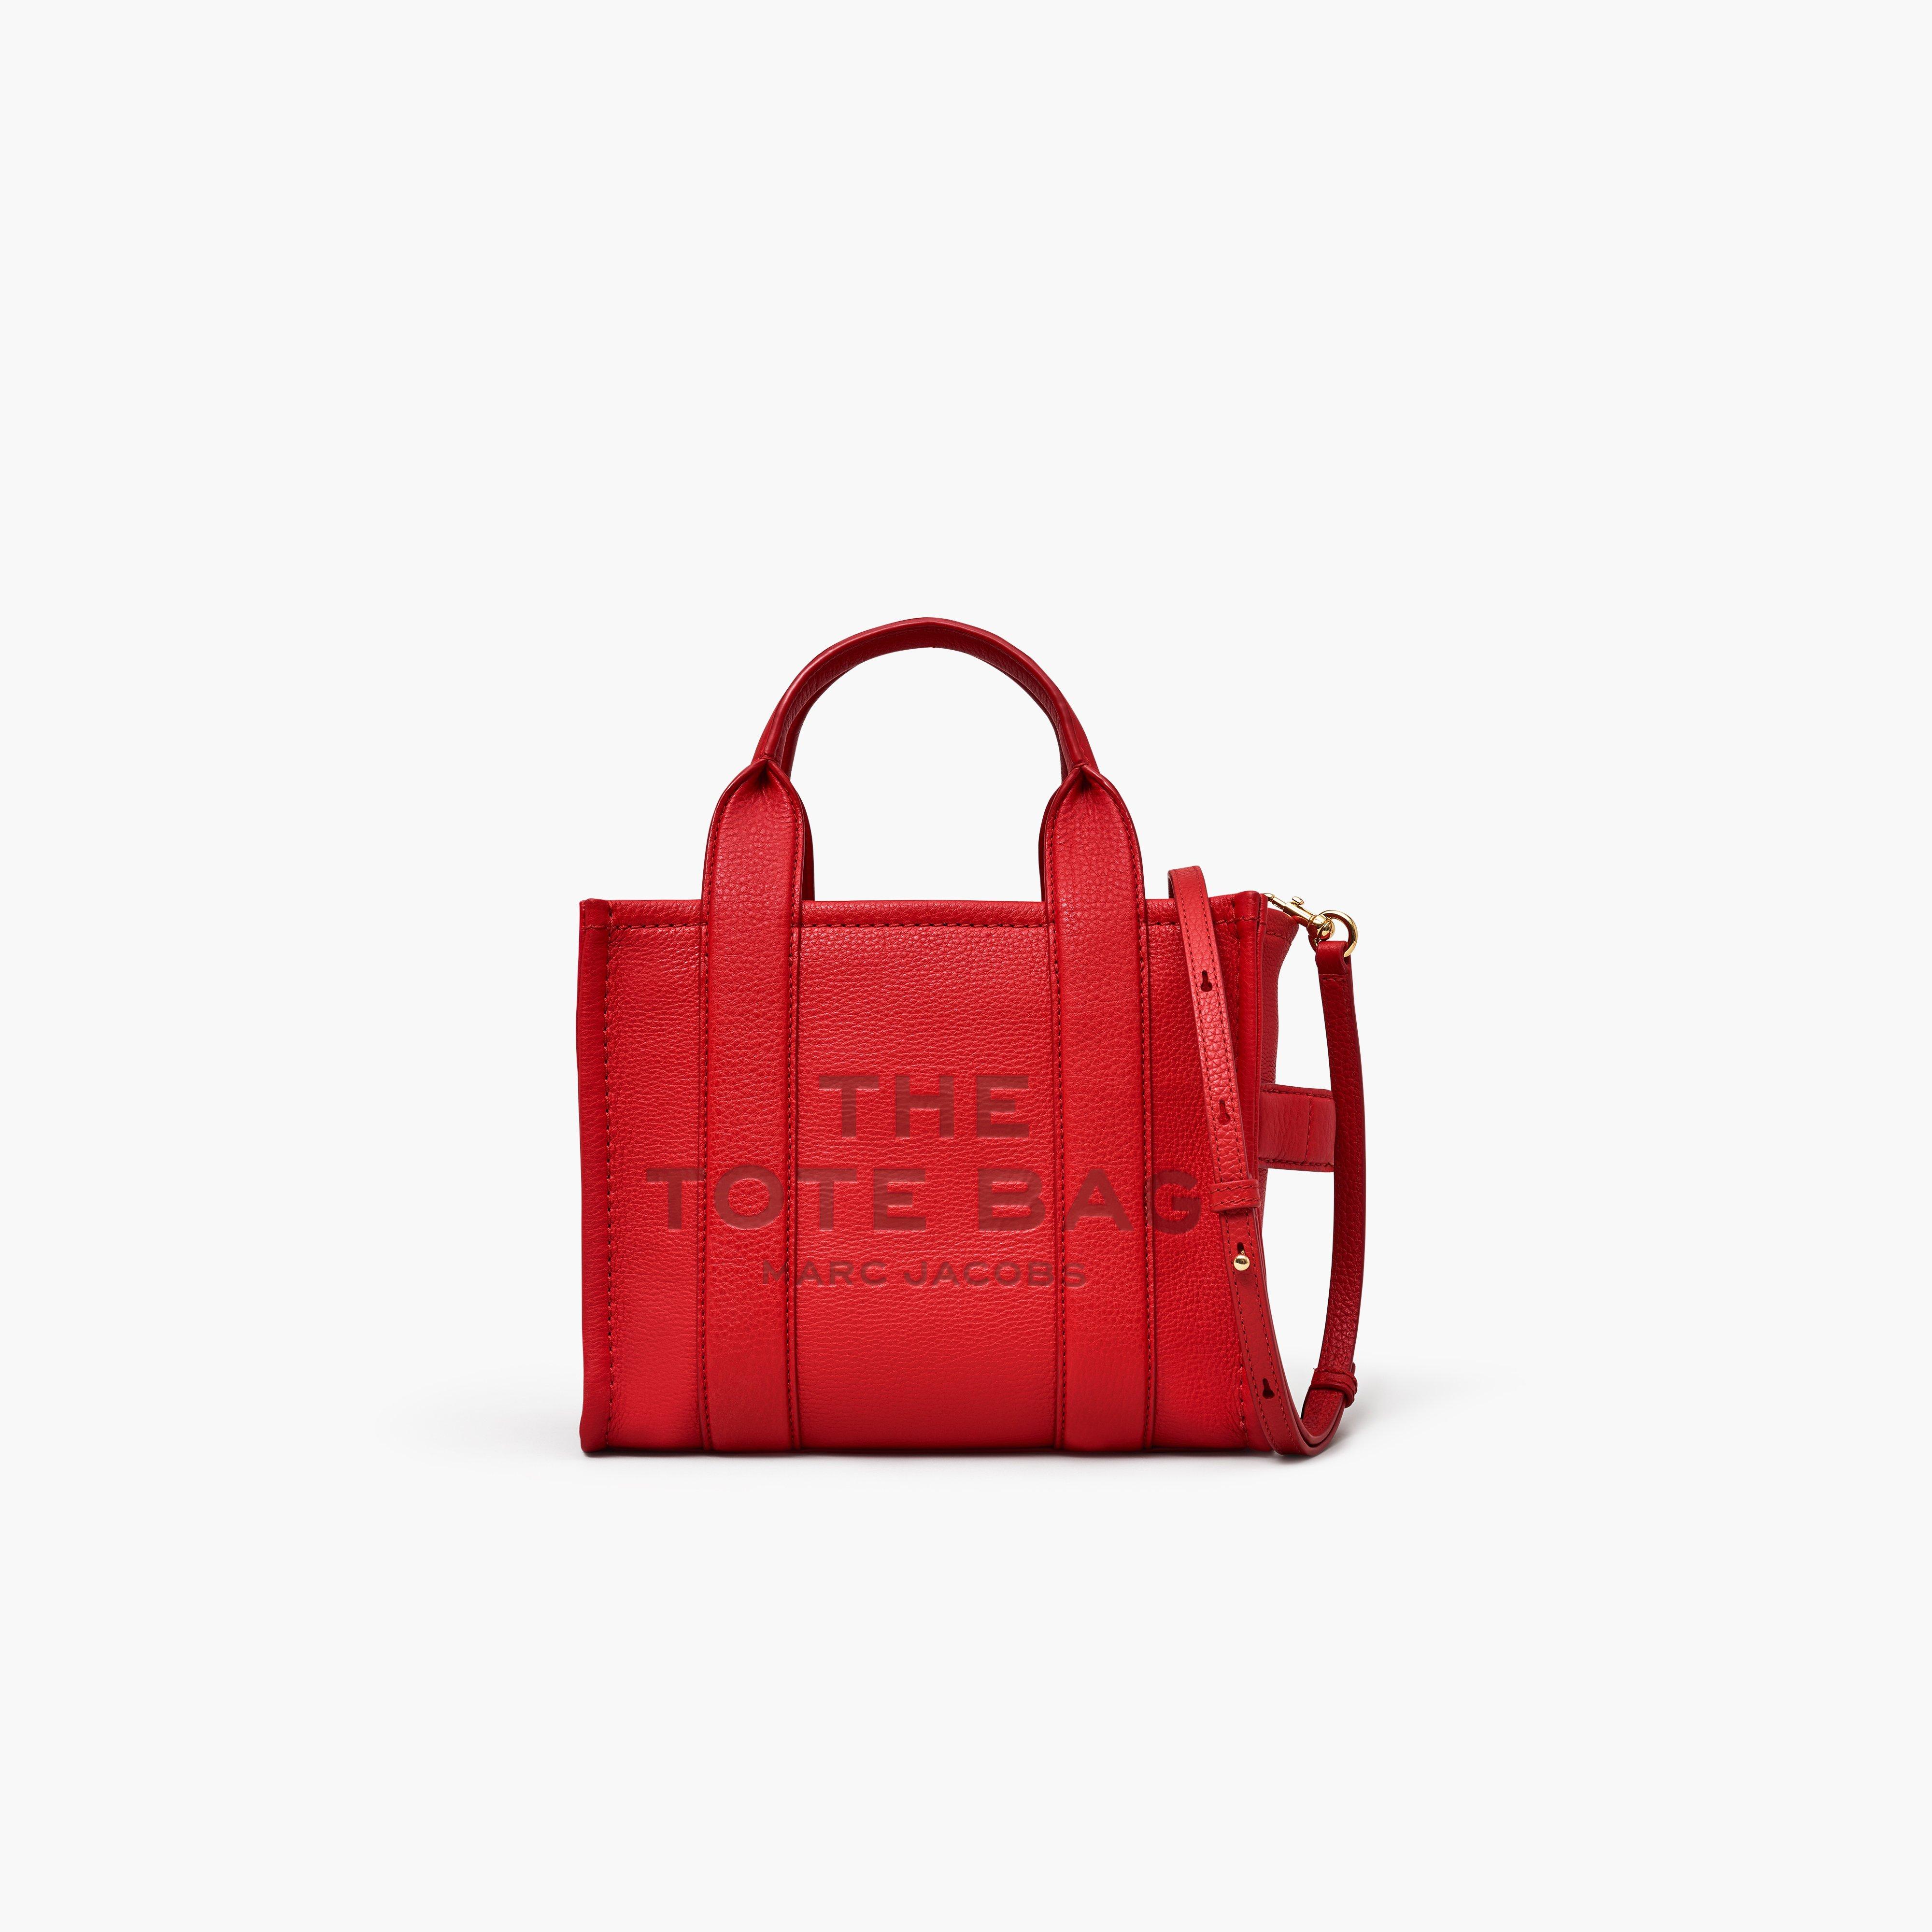 Marc by Marc jacobs The Leather Small Tote Bag,TRUE RED